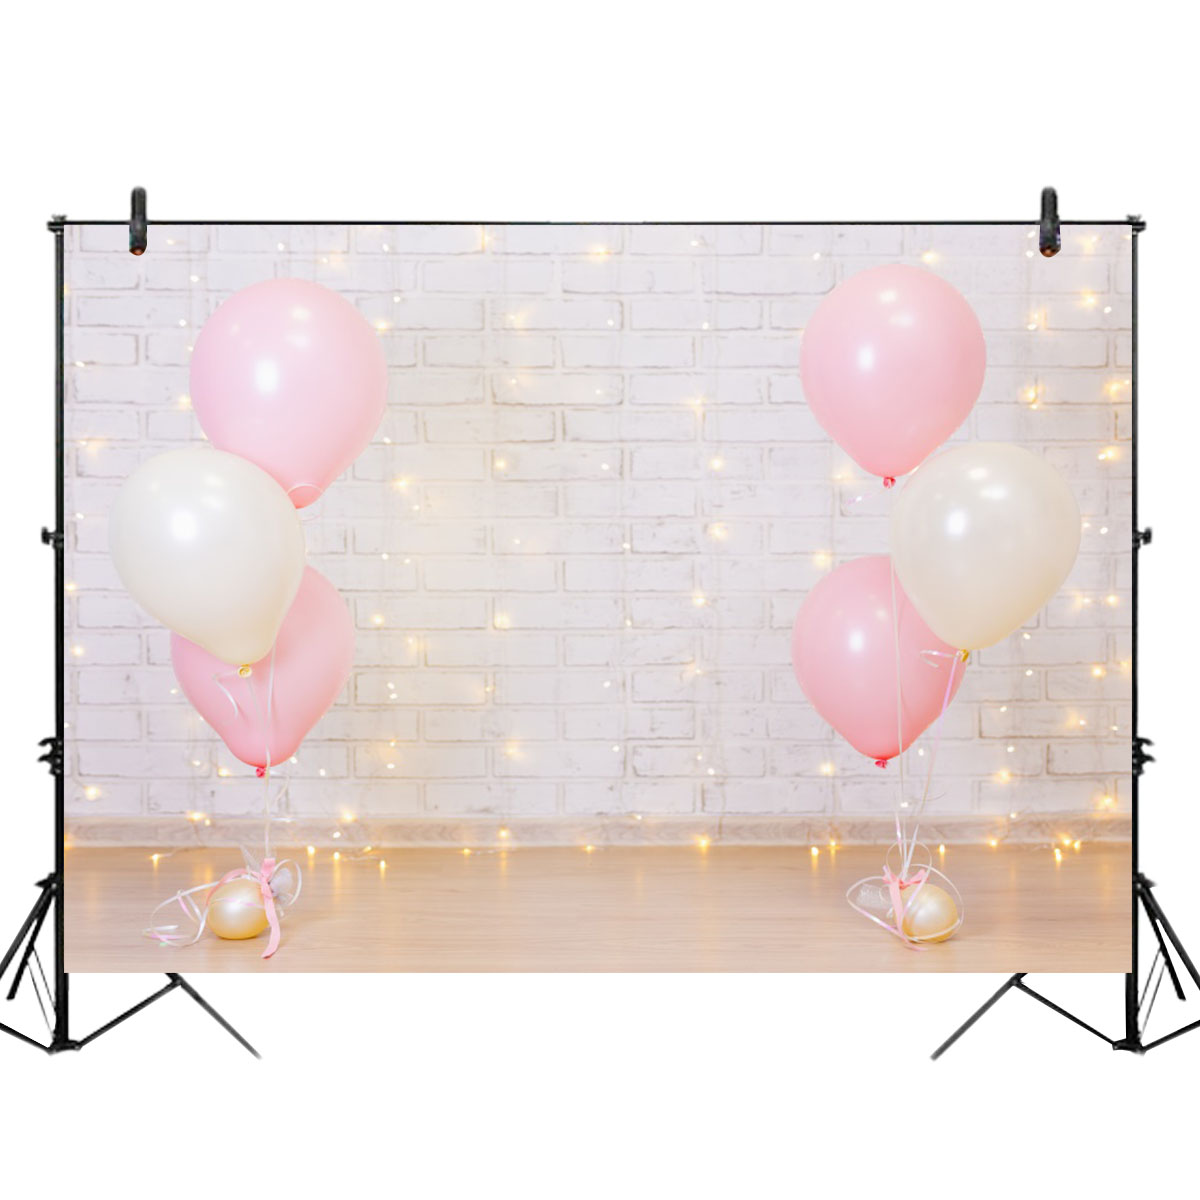 

5x3FT 7x5FT 9x6FT Pink White Balloons Gray Wall Photography Backdrop Background Studio Prop